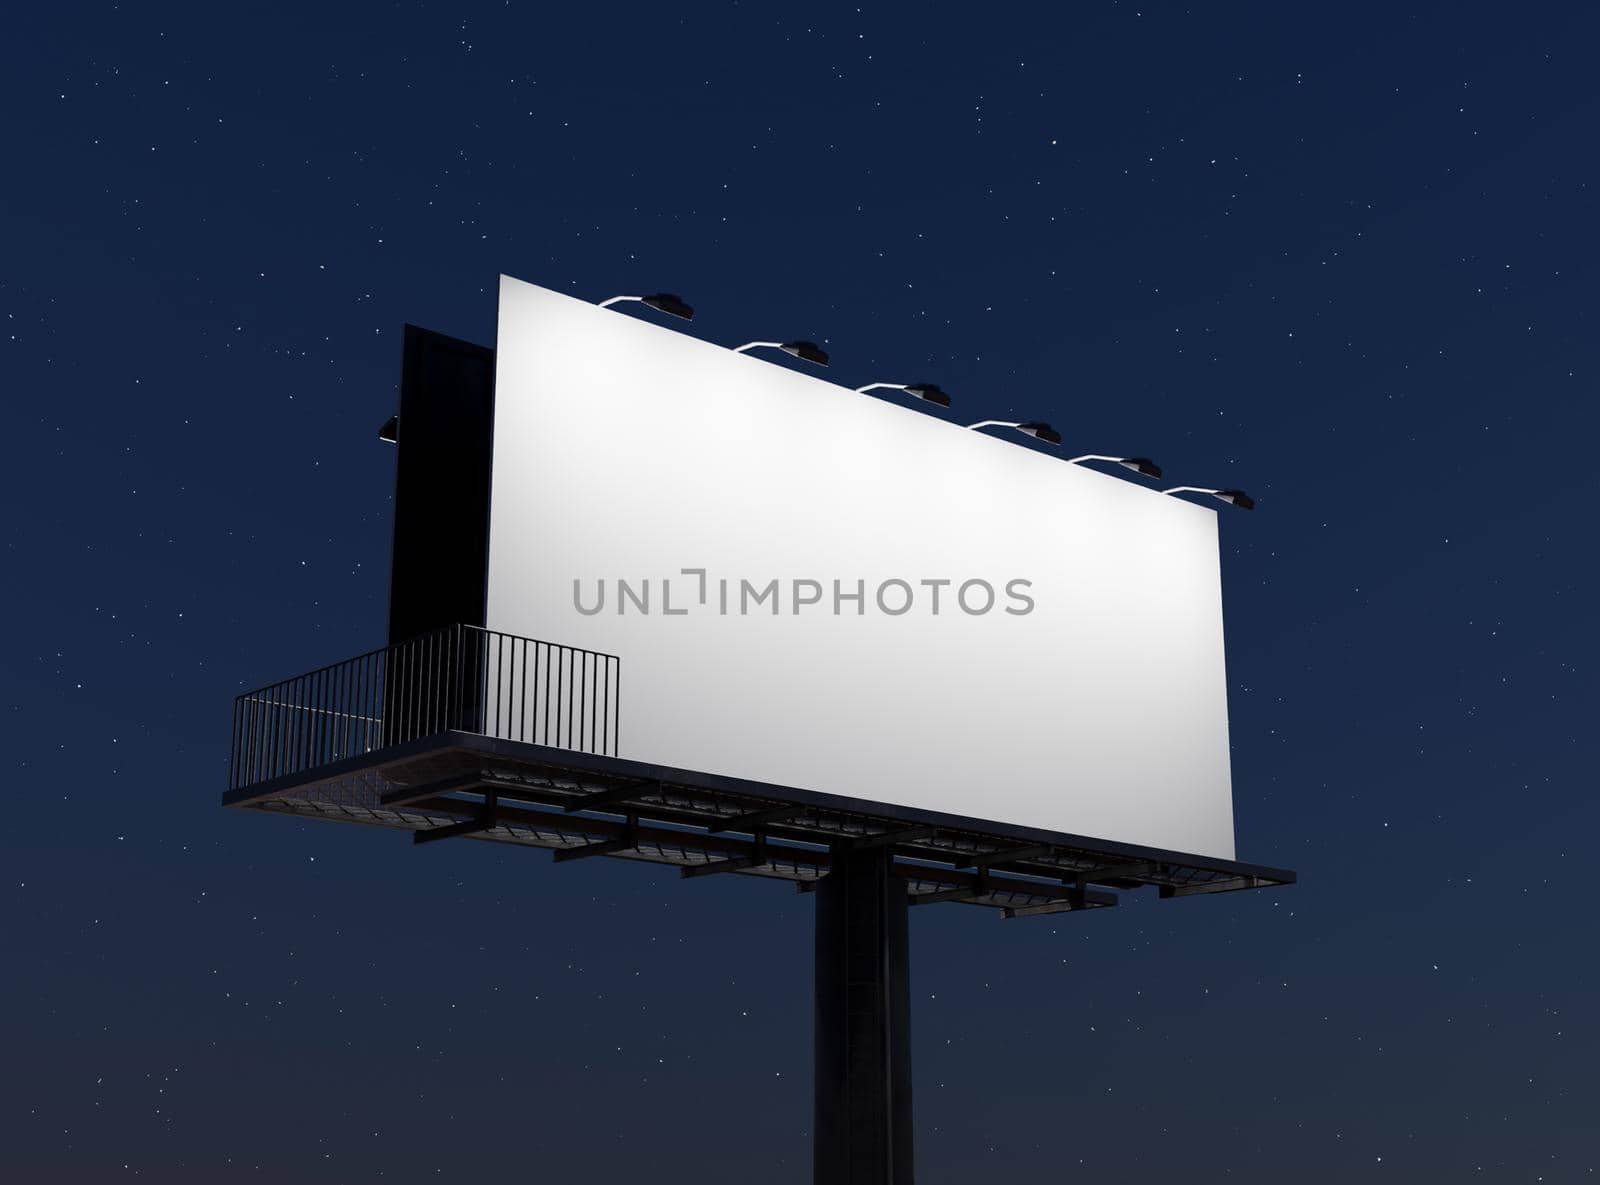 mockup of a street billboard illuminated with spotlights at night with starry sky. 3d render